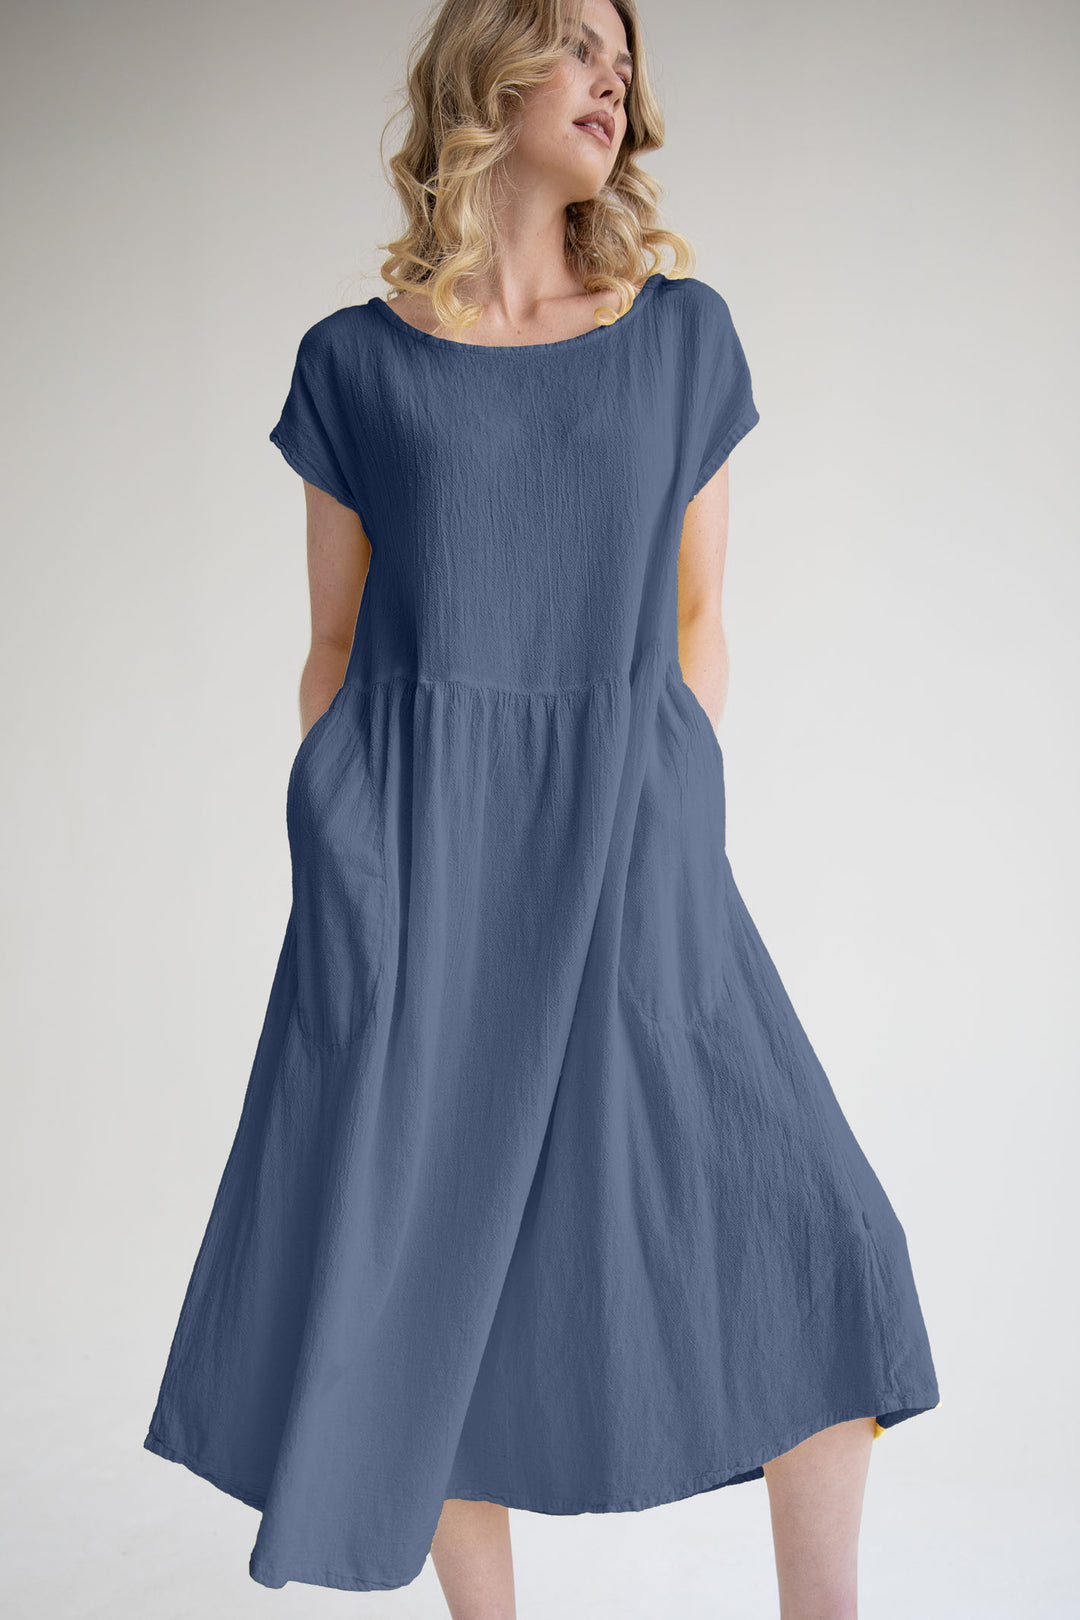 Onelife D625 Alba Neptune Blue Boat Neck Cap Sleeve Dress - Experience Boutique